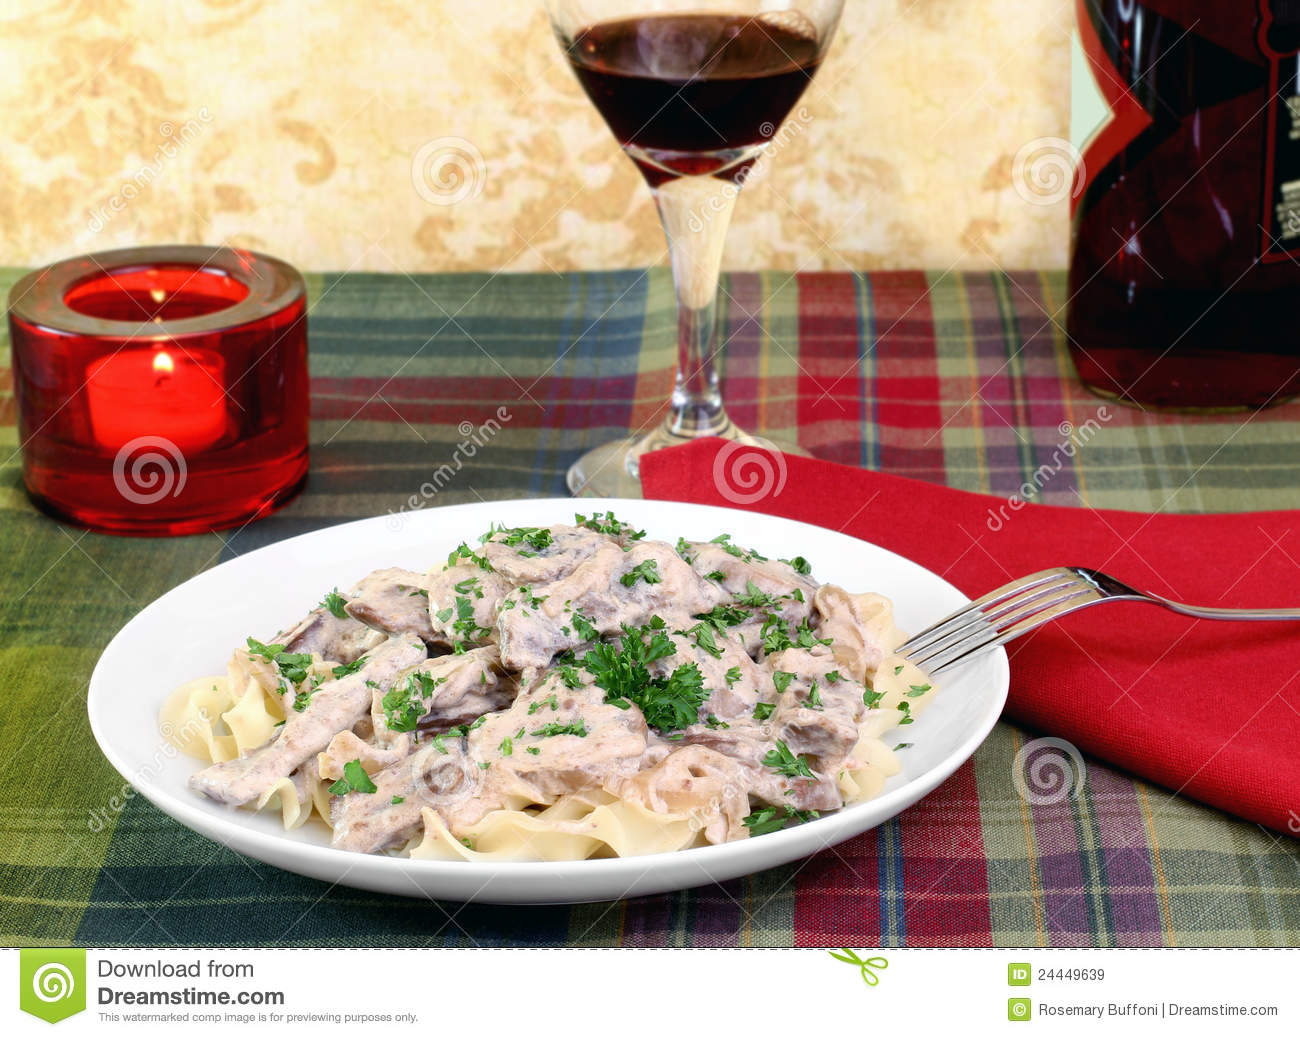 Beef Stroganoff And Egg Noodles With Wine And A Lit Candle In A Dinner    